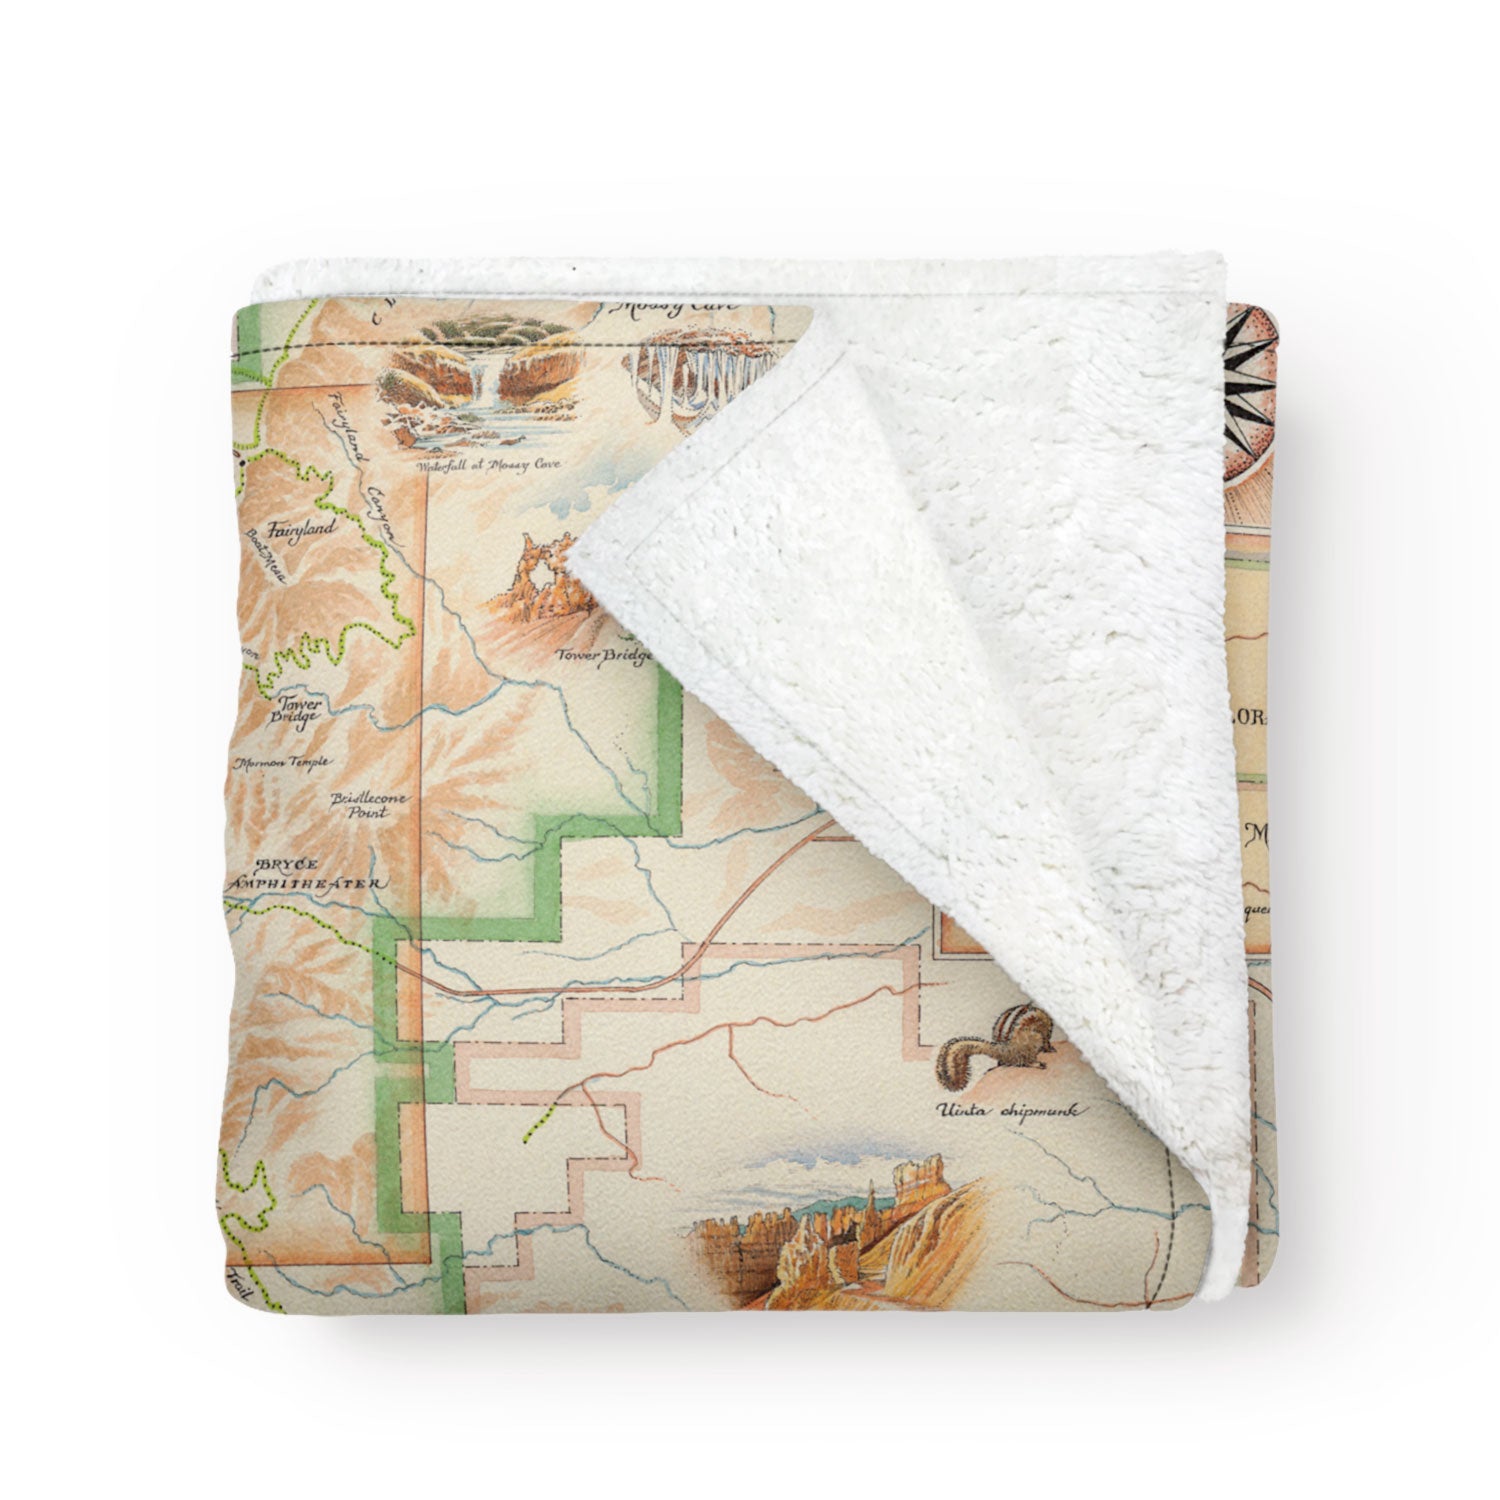 Bryce Canyon National Park Map fleece blanket on earth tone colors featuring canyons, horseback, hoodoos, Rim Trail, Sunrise Point, Sunset Point, Inspiration Point and Bryce Point. Measures 58